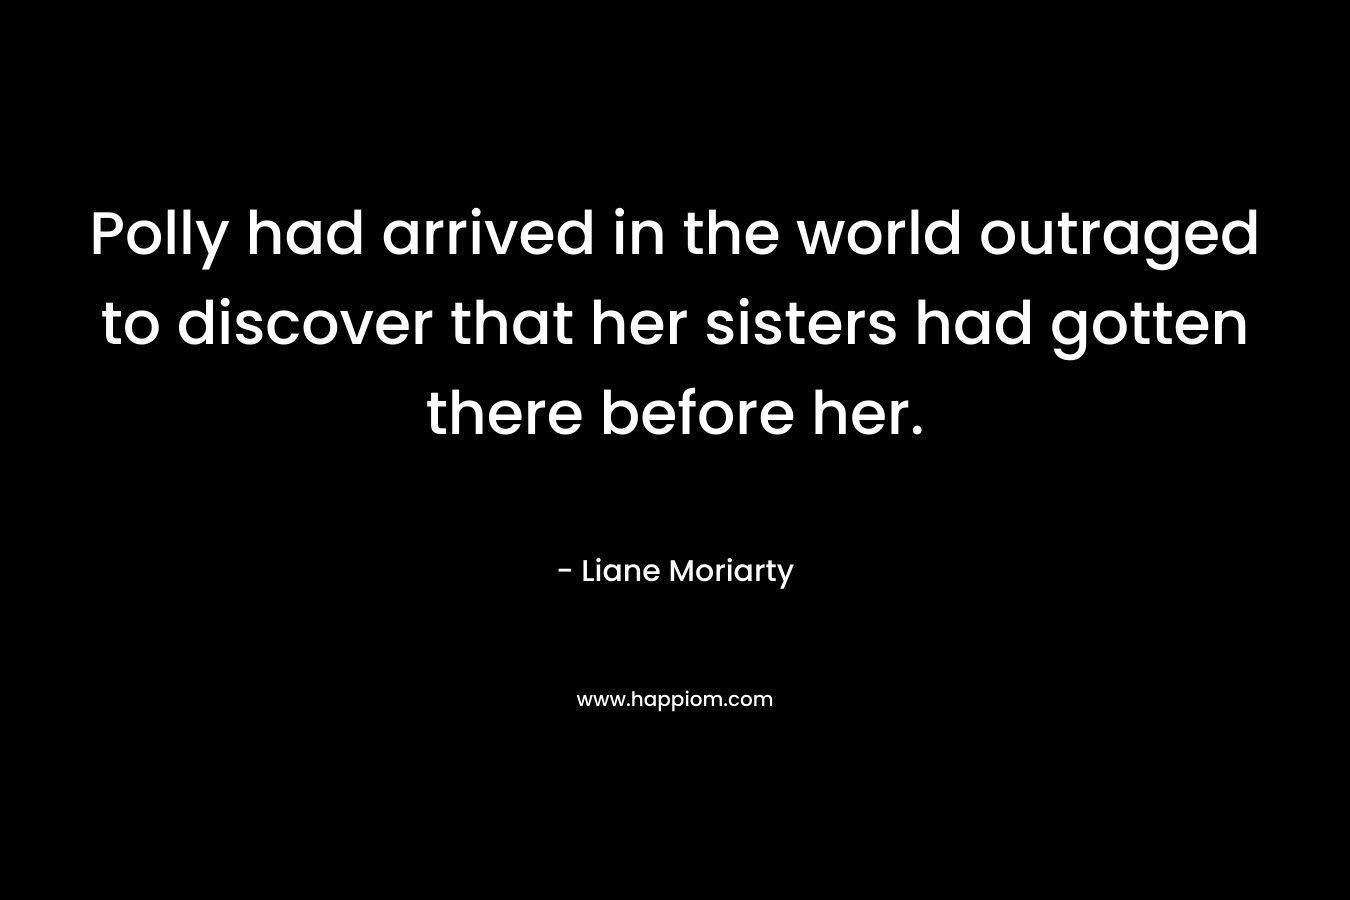 Polly had arrived in the world outraged to discover that her sisters had gotten there before her. – Liane Moriarty